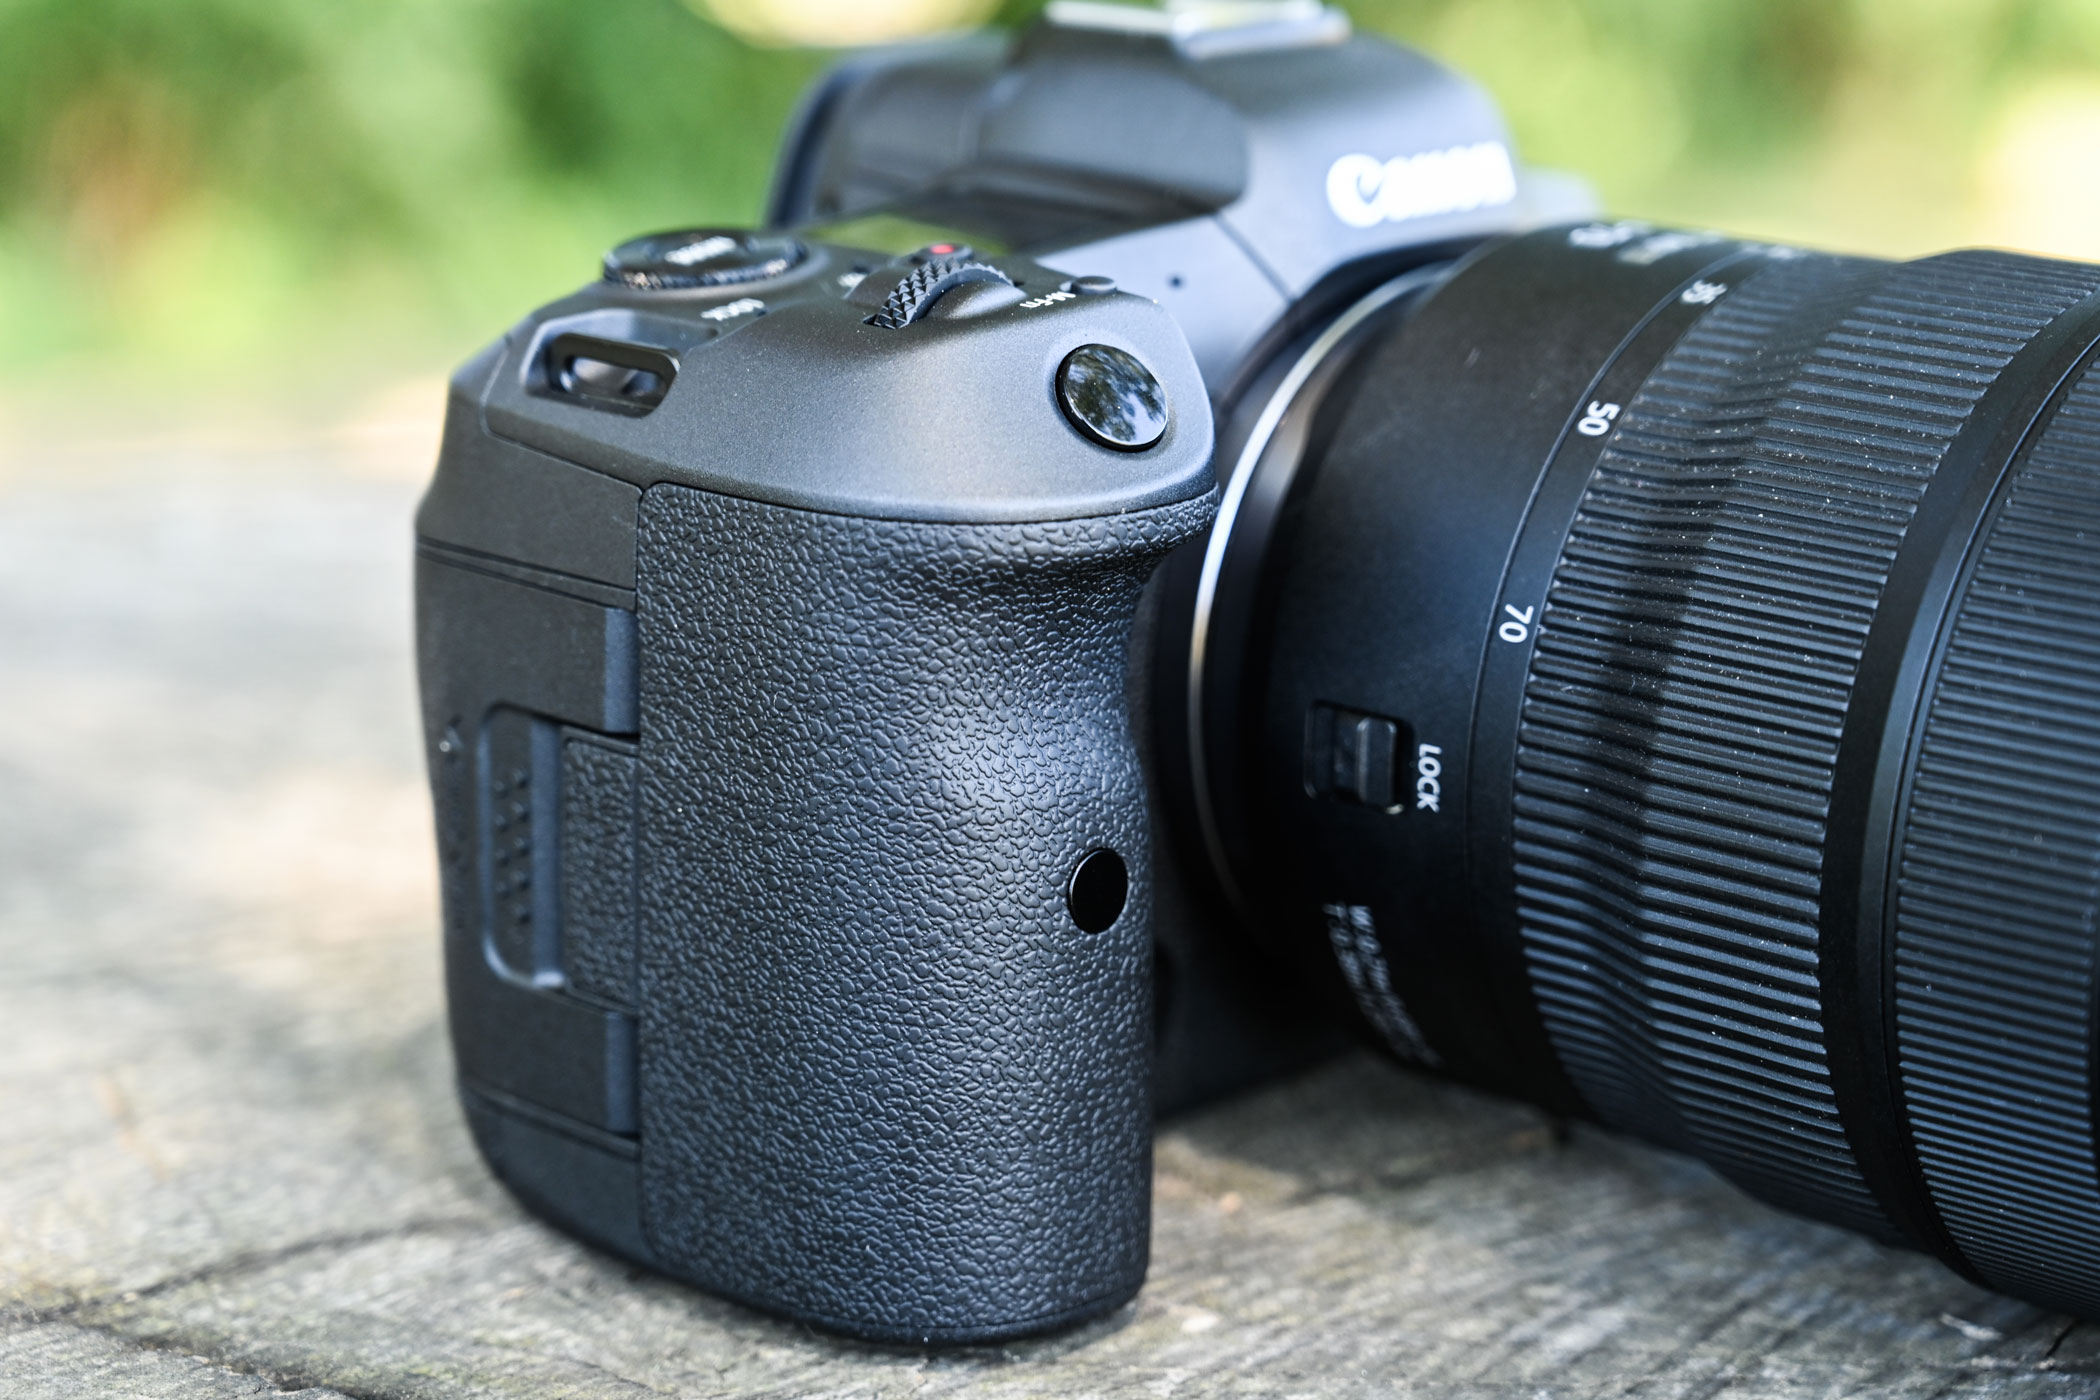 The tall, deep handgrip is every bit as good as those used on Canon's EOS 5D-series DSLRs